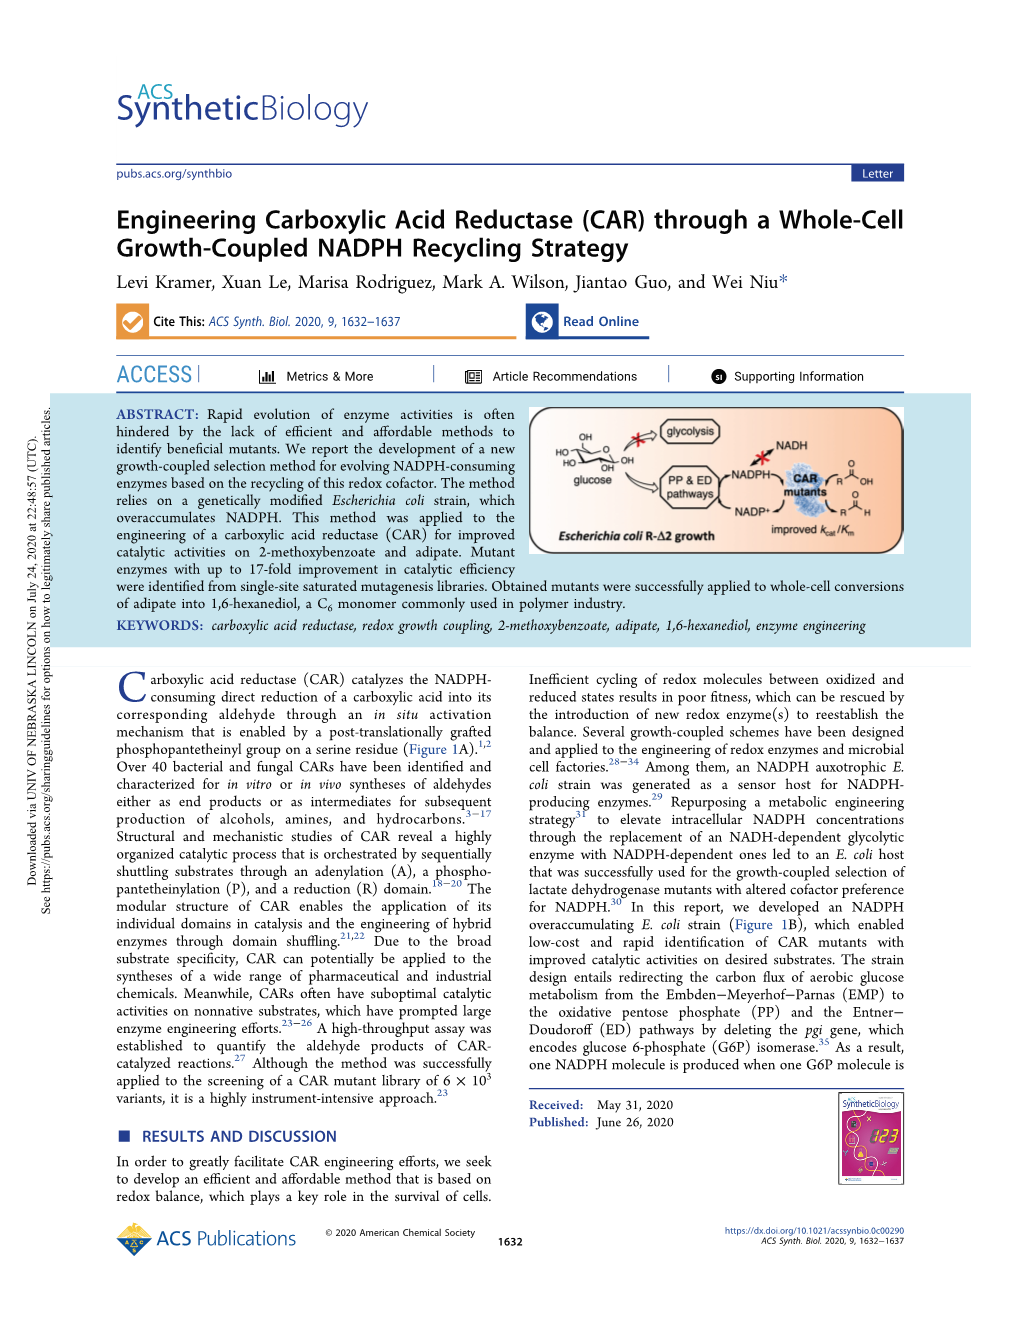 Engineering Carboxylic Acid Reductase (CAR) Through a Whole-Cell Growth-Coupled NADPH Recycling Strategy Levi Kramer, Xuan Le, Marisa Rodriguez, Mark A